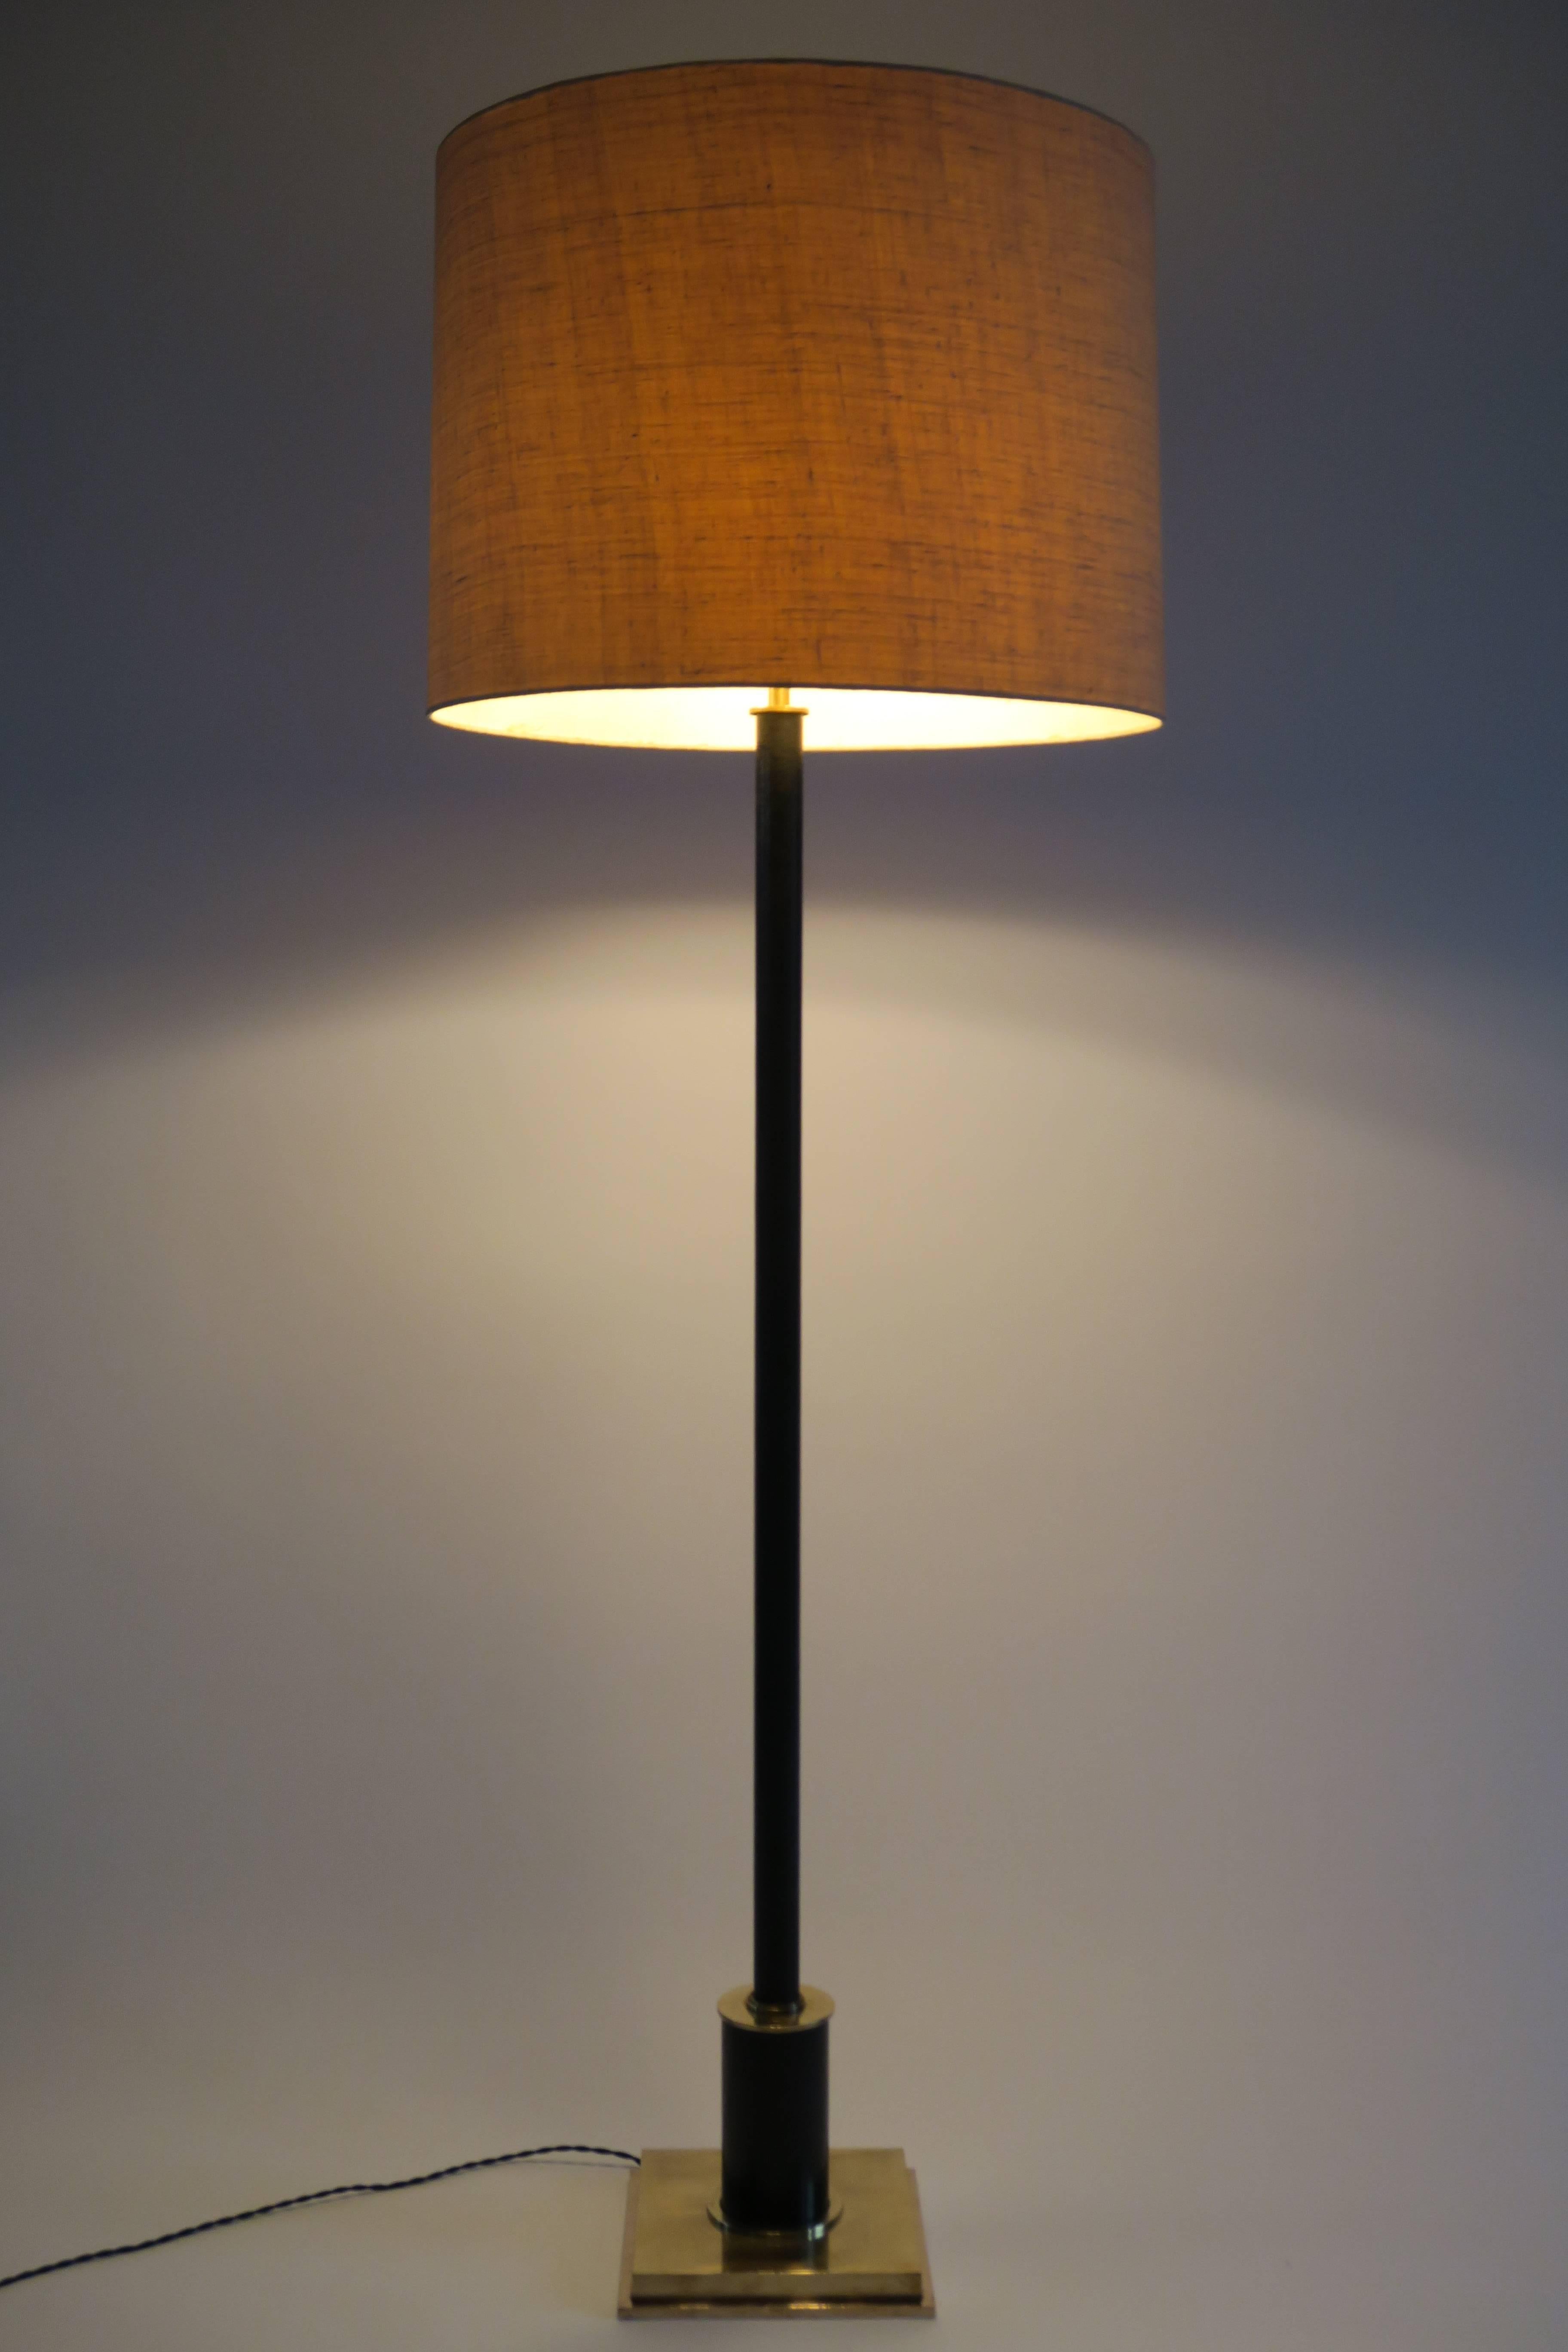 Chic pair of floor lamp in brass covered in leather, date the 1960s, neoclassic style , each lamp have four sockets and can modulate the light in several directions, original fabric for the lampshade in a natural silk fabric and at the top in